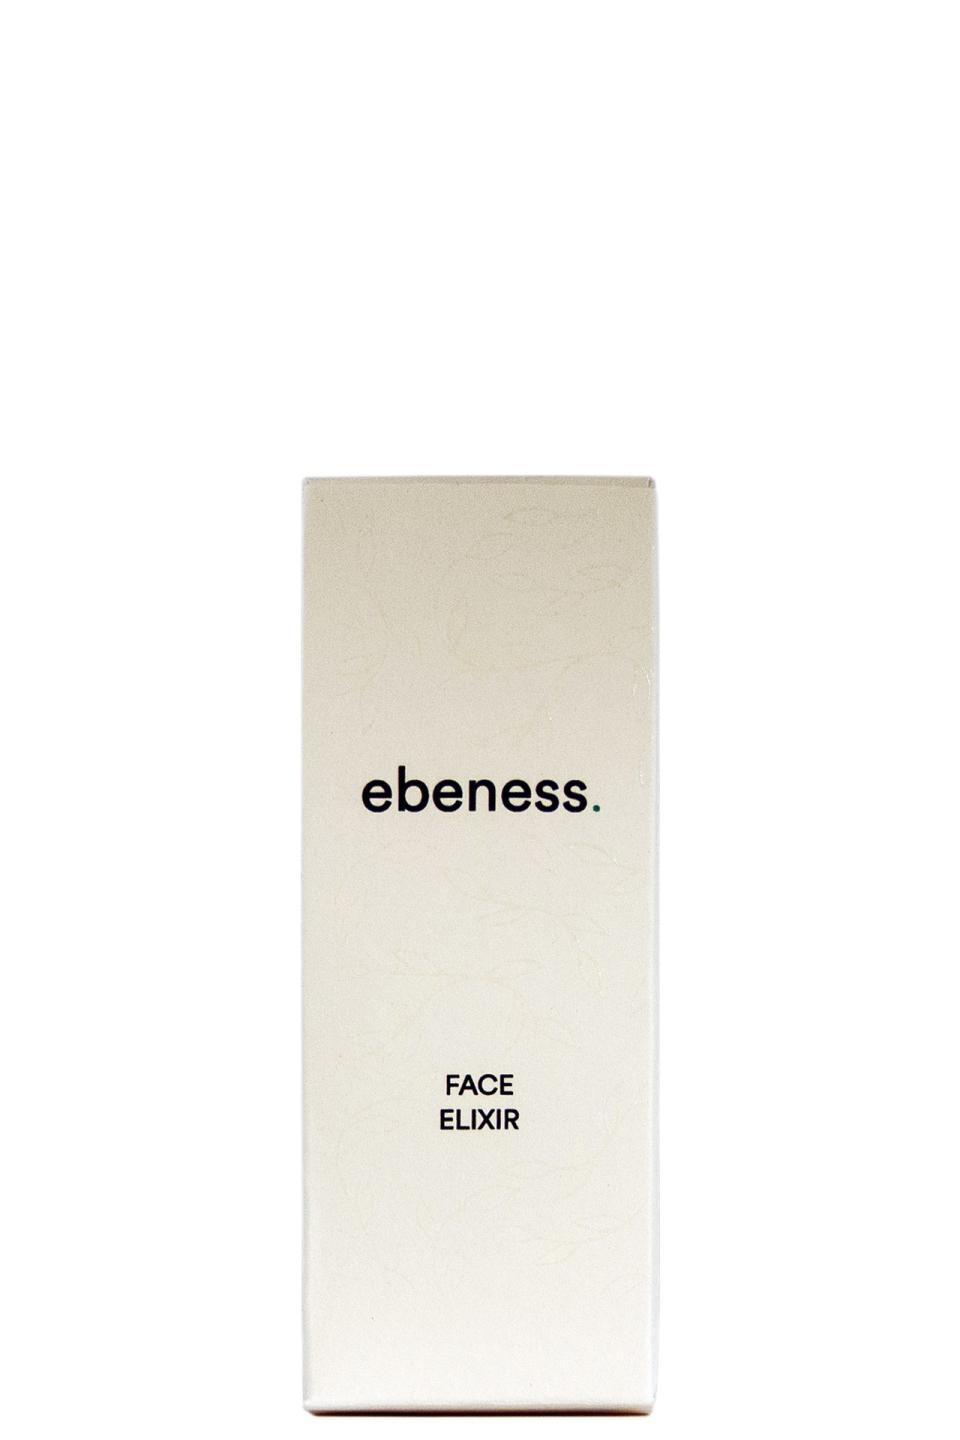 Personalised Skincare Face Elixir by Ebeness